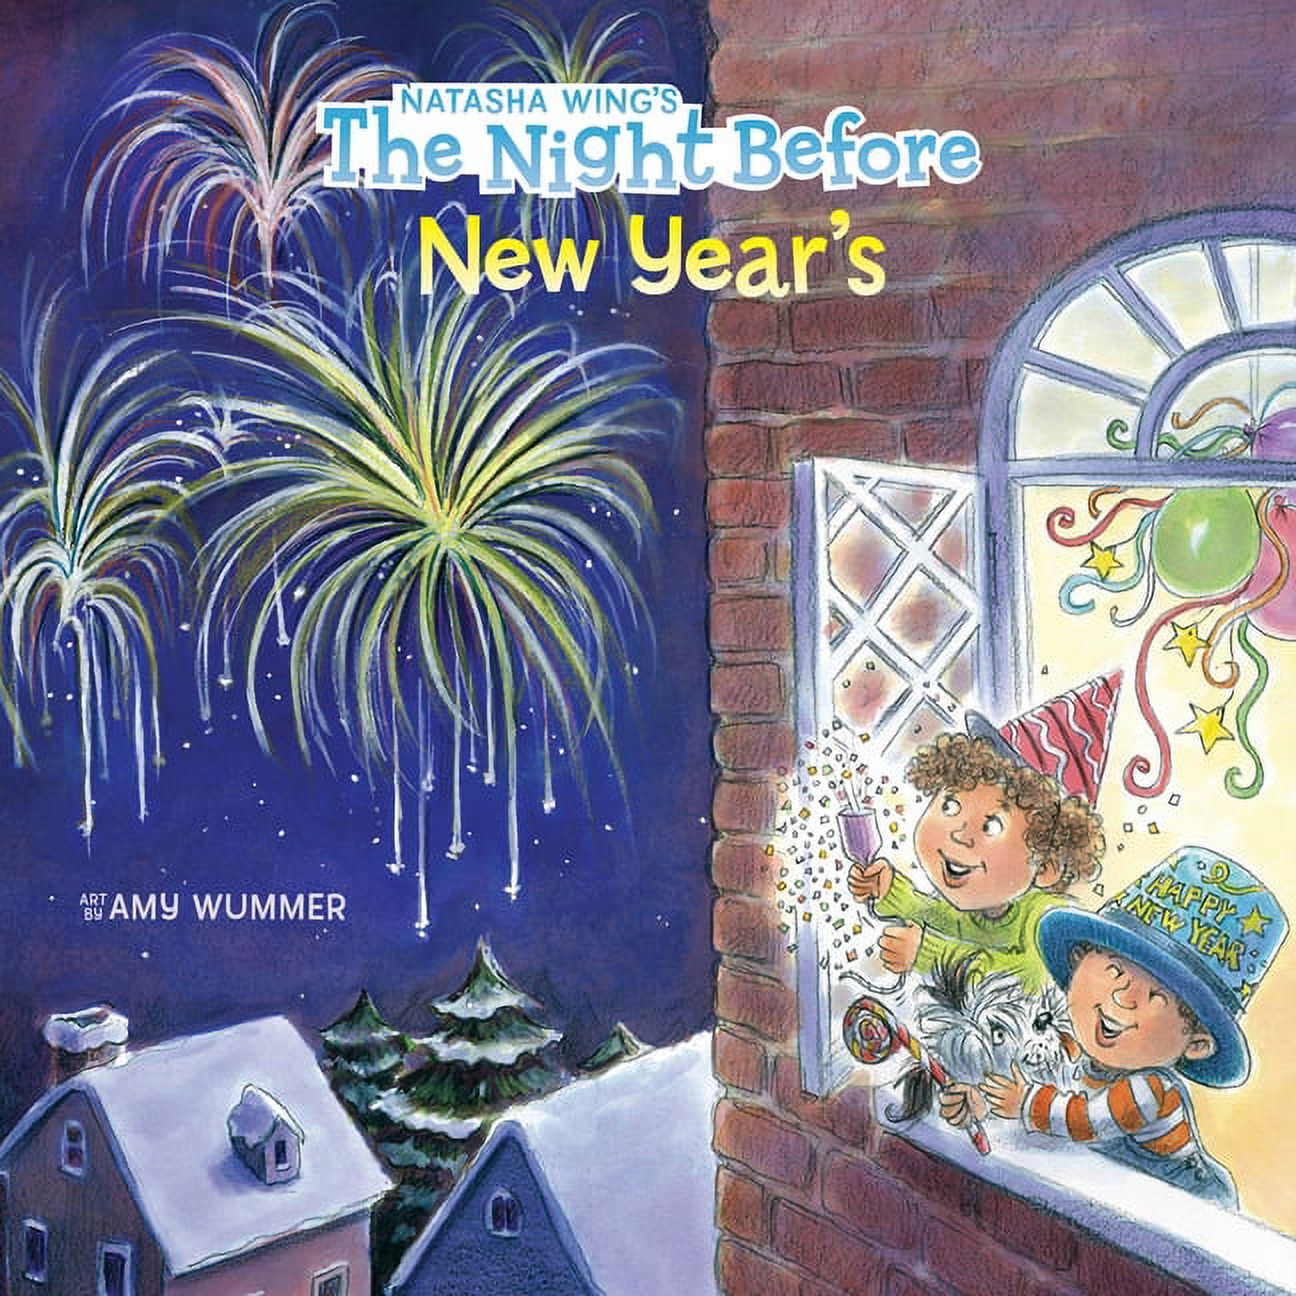 The Night Before: The Night Before New Year's (Paperback) - image 1 of 1